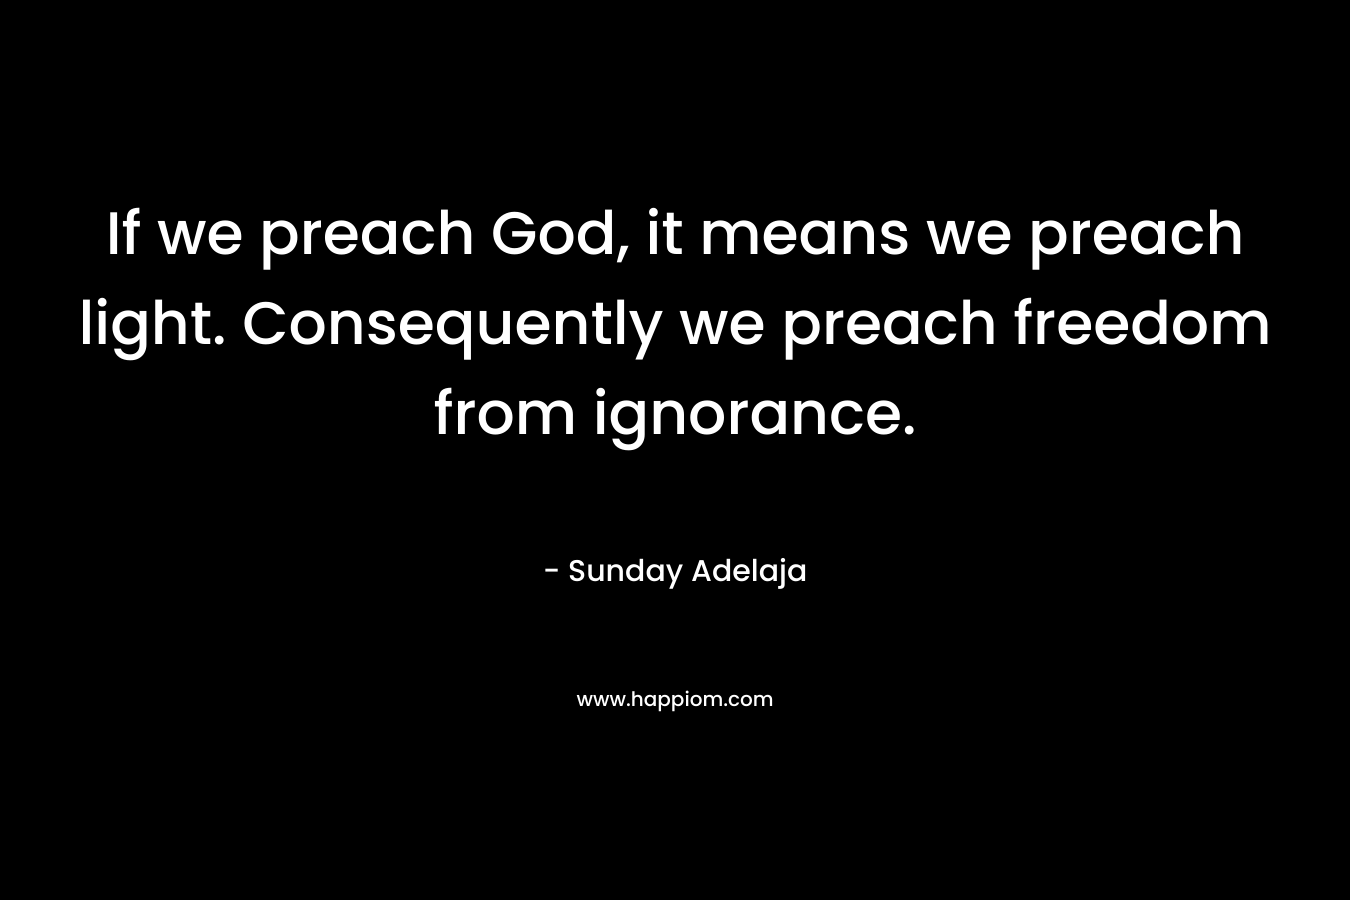 If we preach God, it means we preach light. Consequently we preach freedom from ignorance.